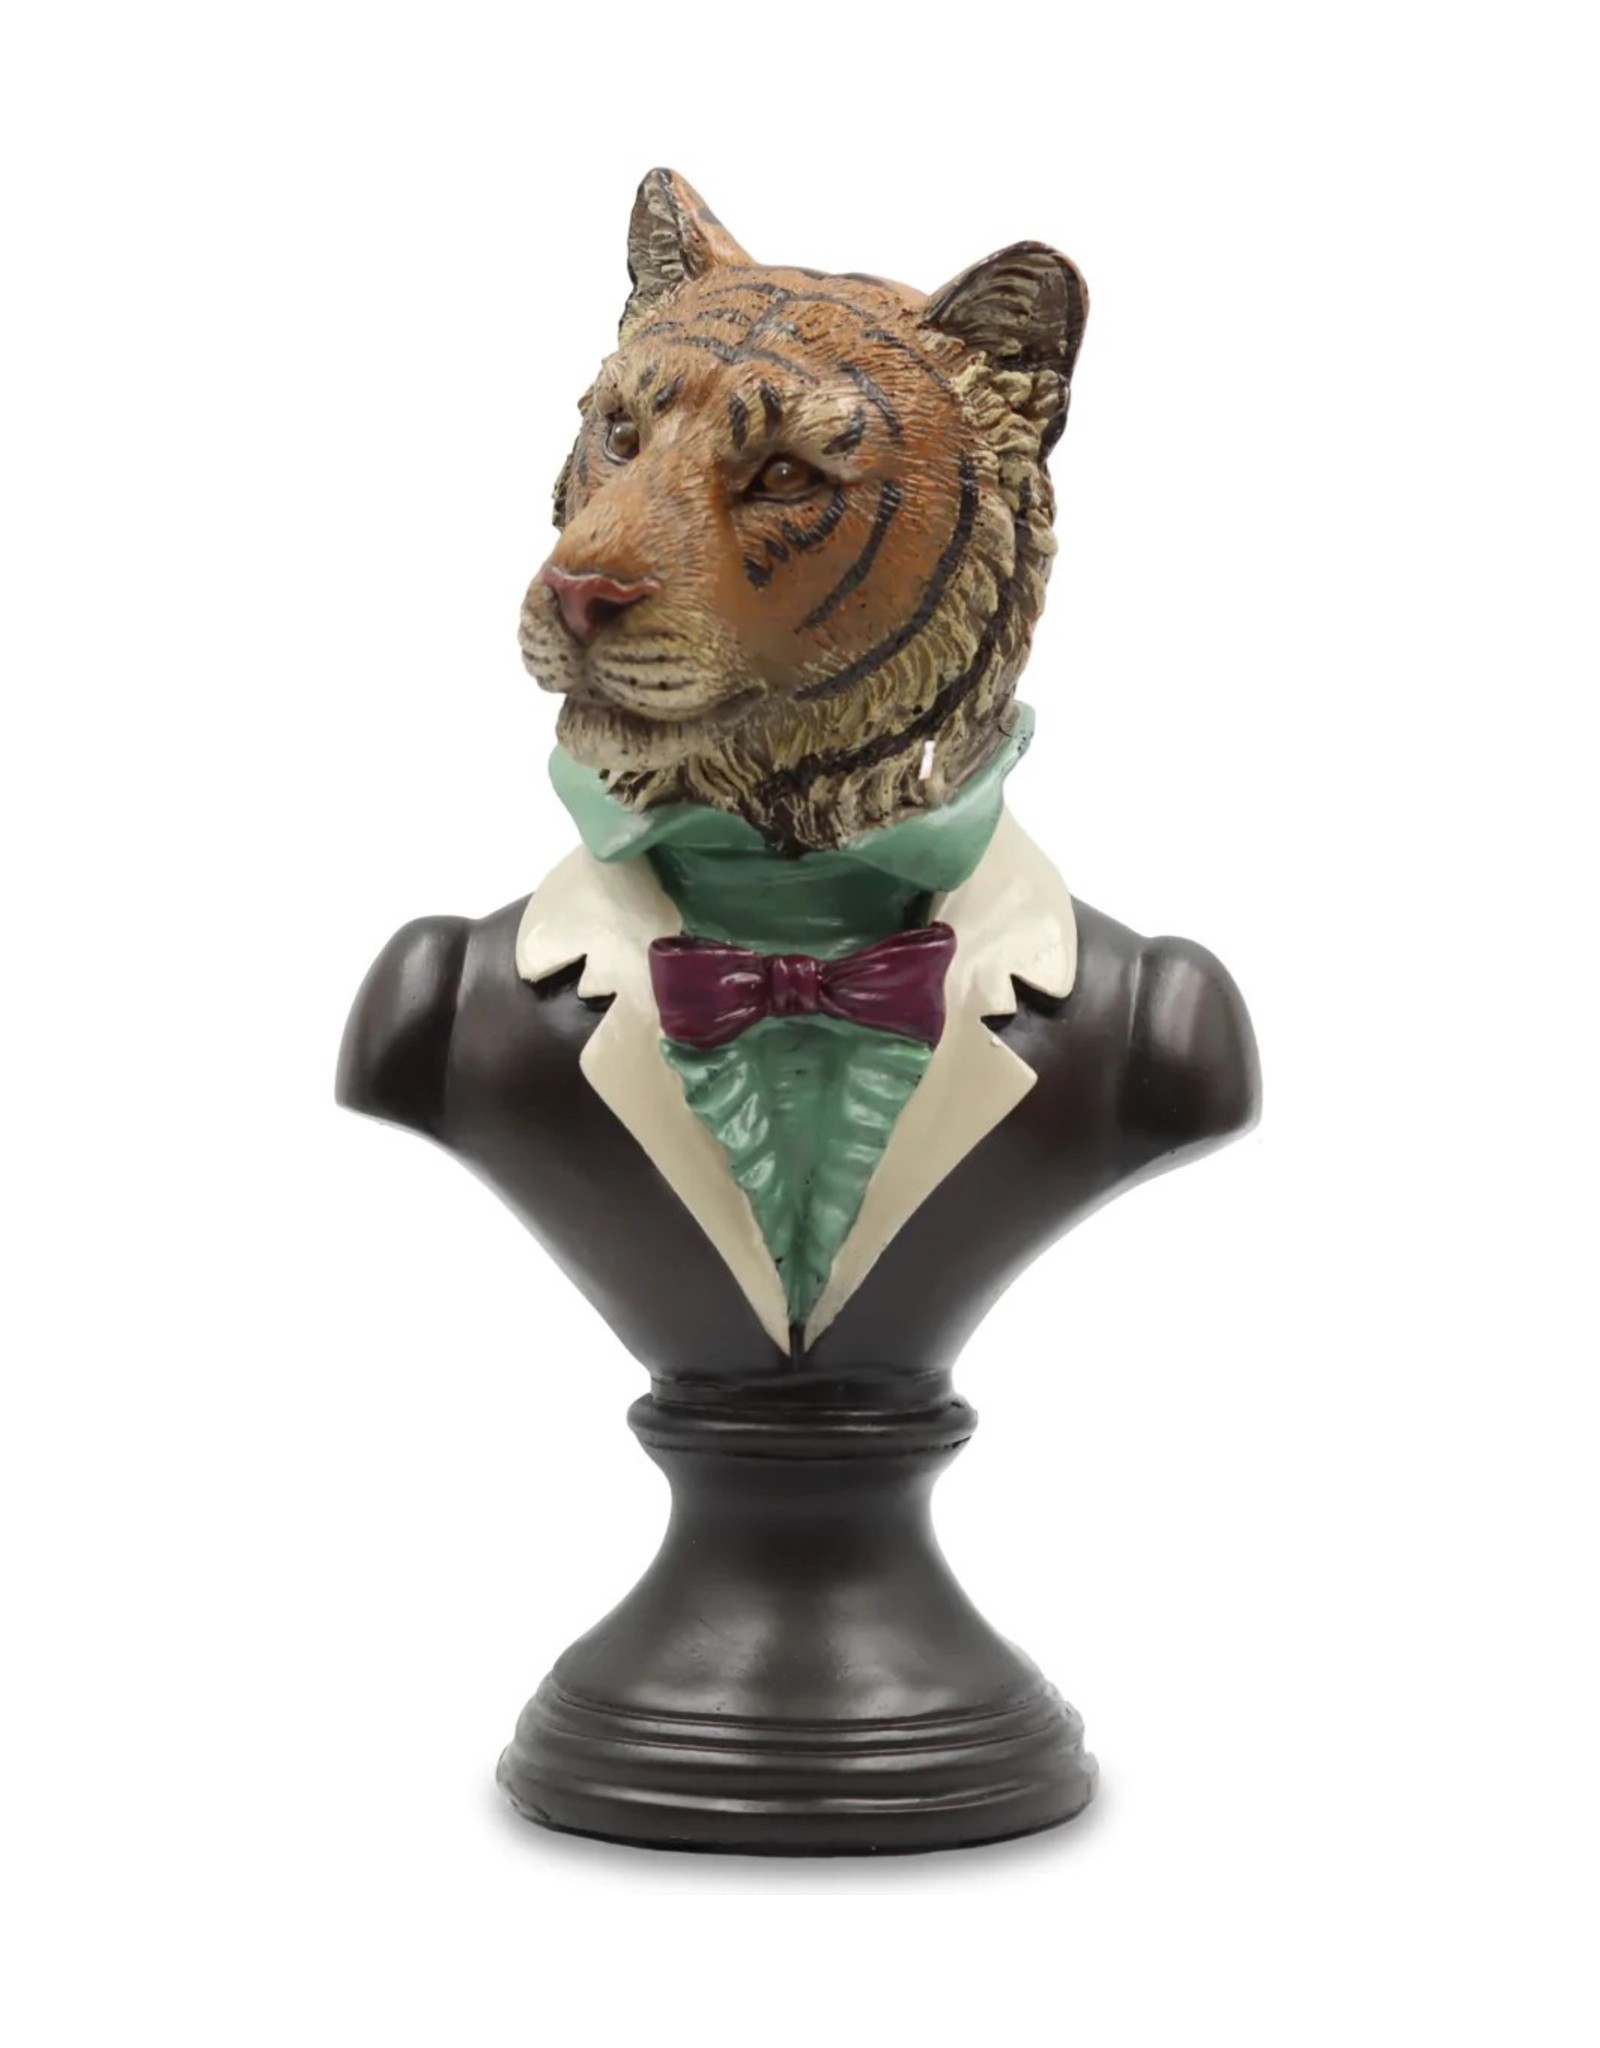 Bentley&Bo Giftware & Lifestyle - Tiger in Military Uniform bust 25cm